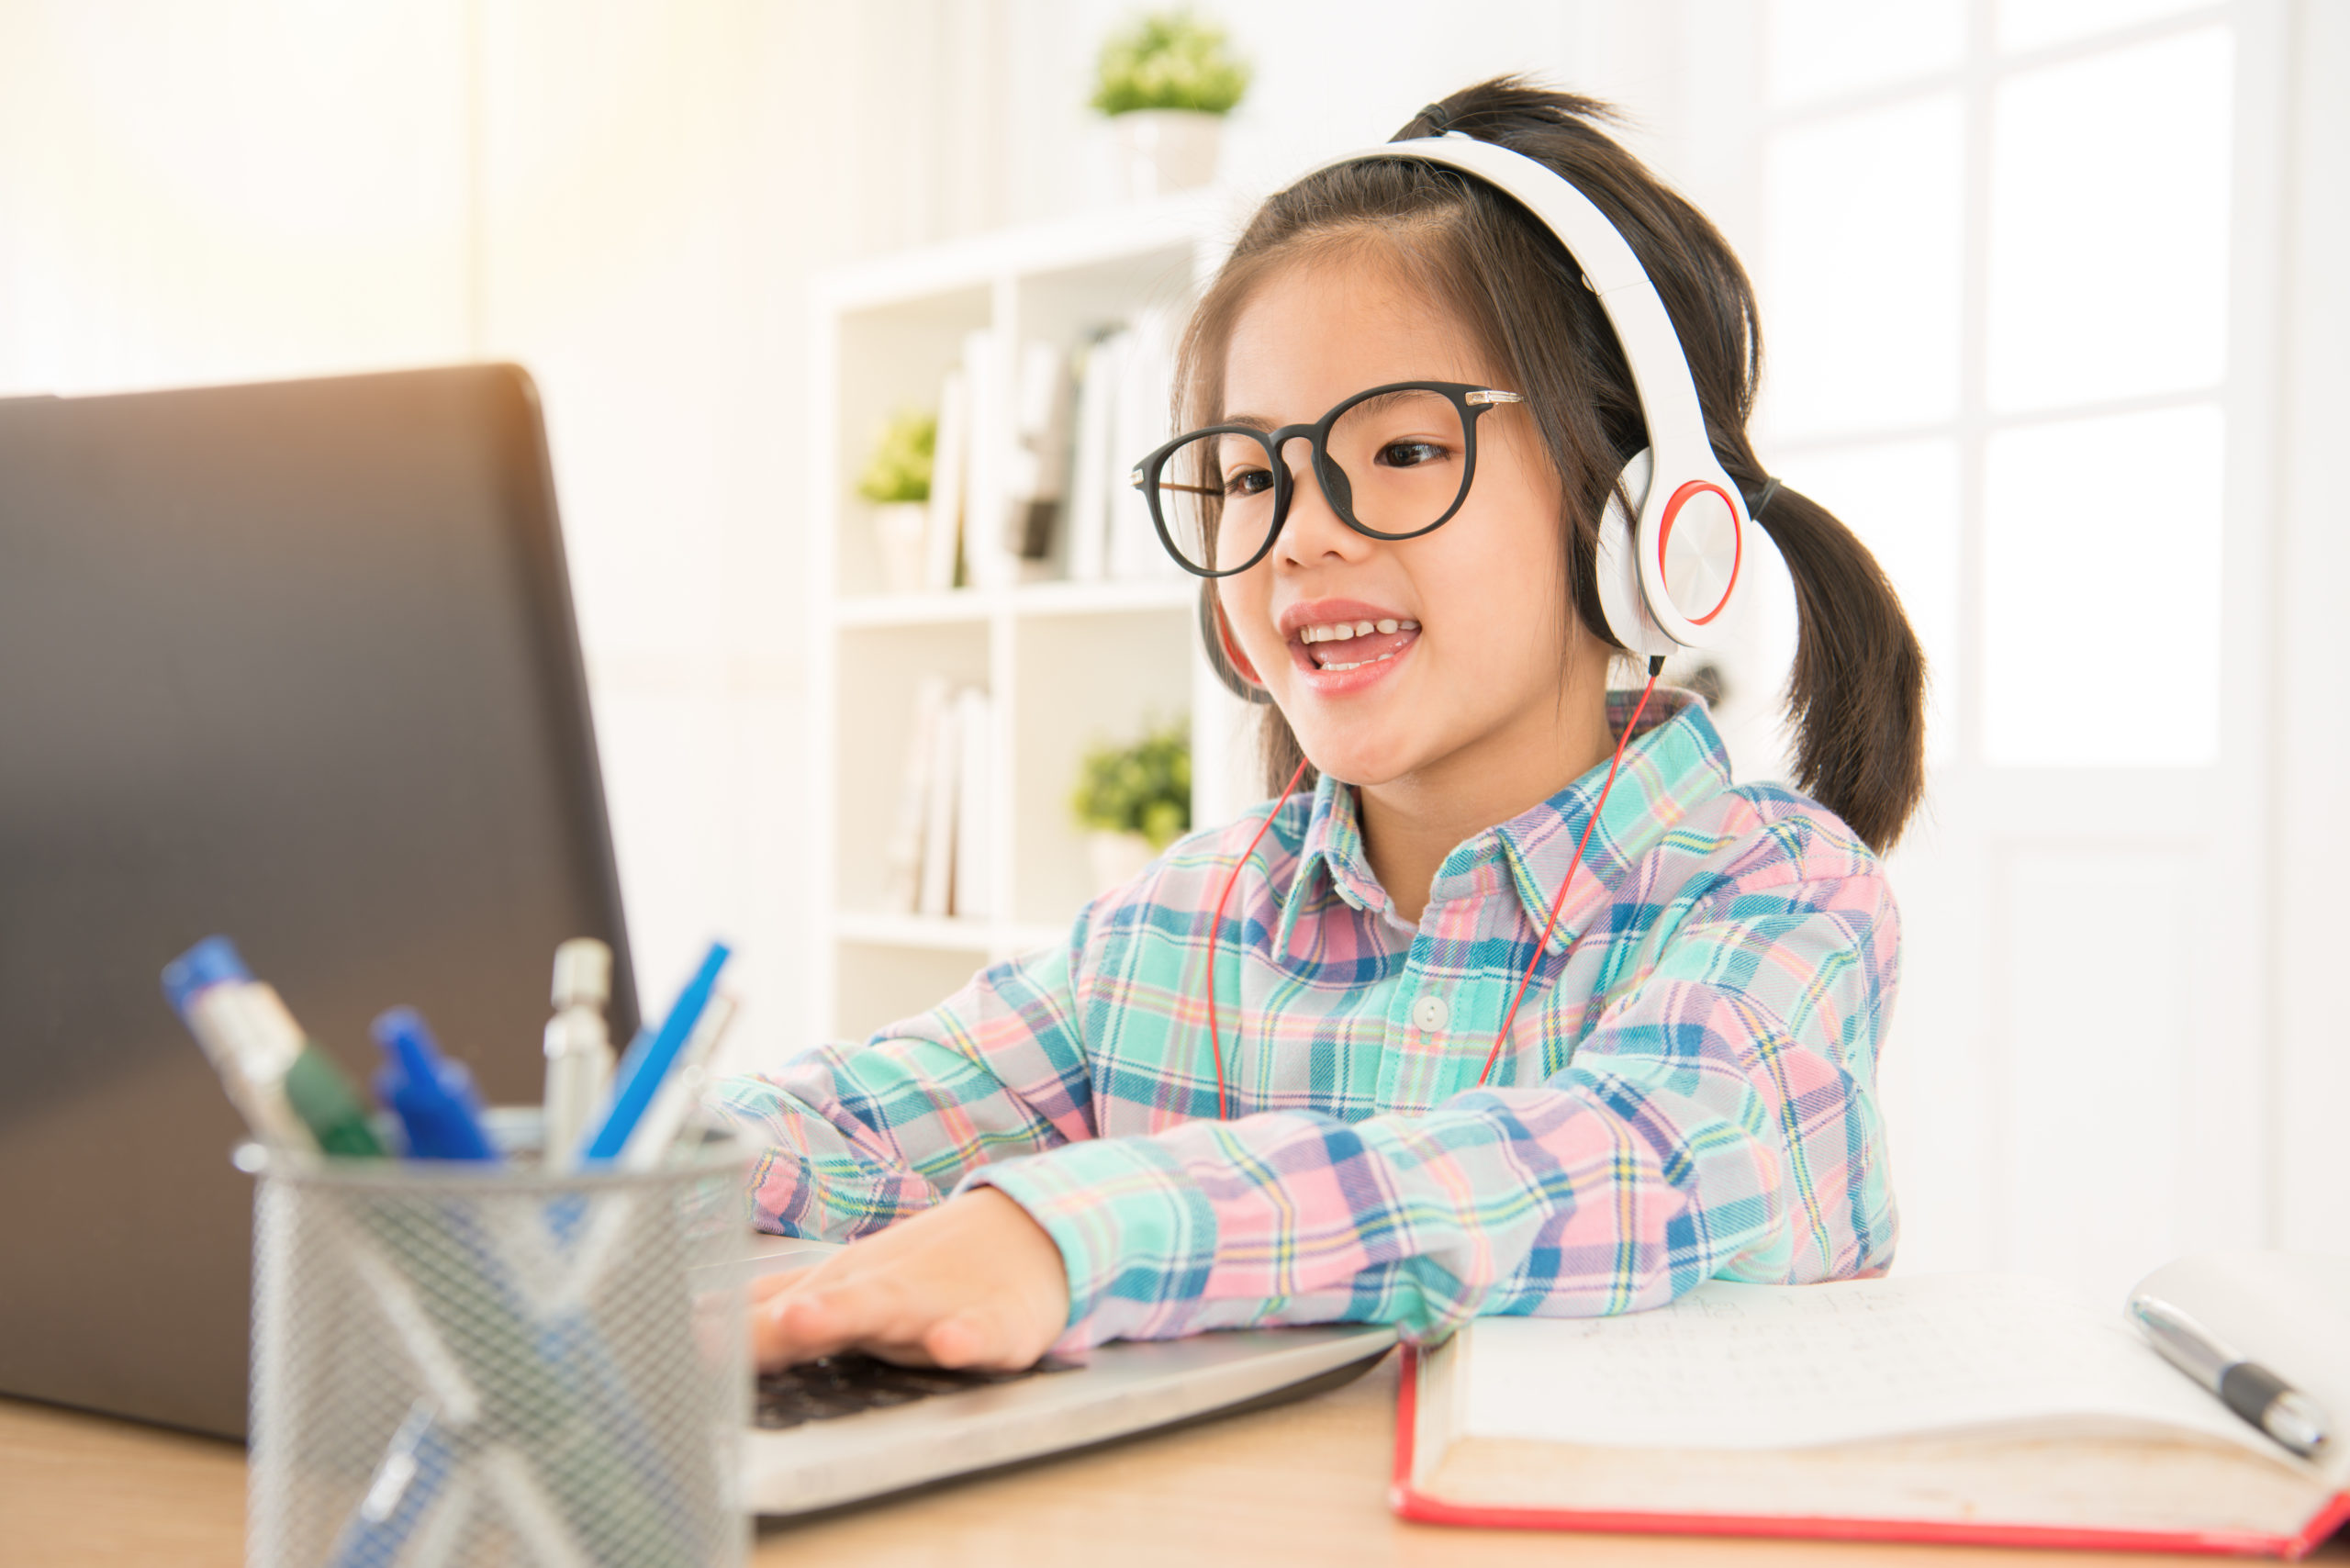 young girl is wearing glasses and headphones while using a computer